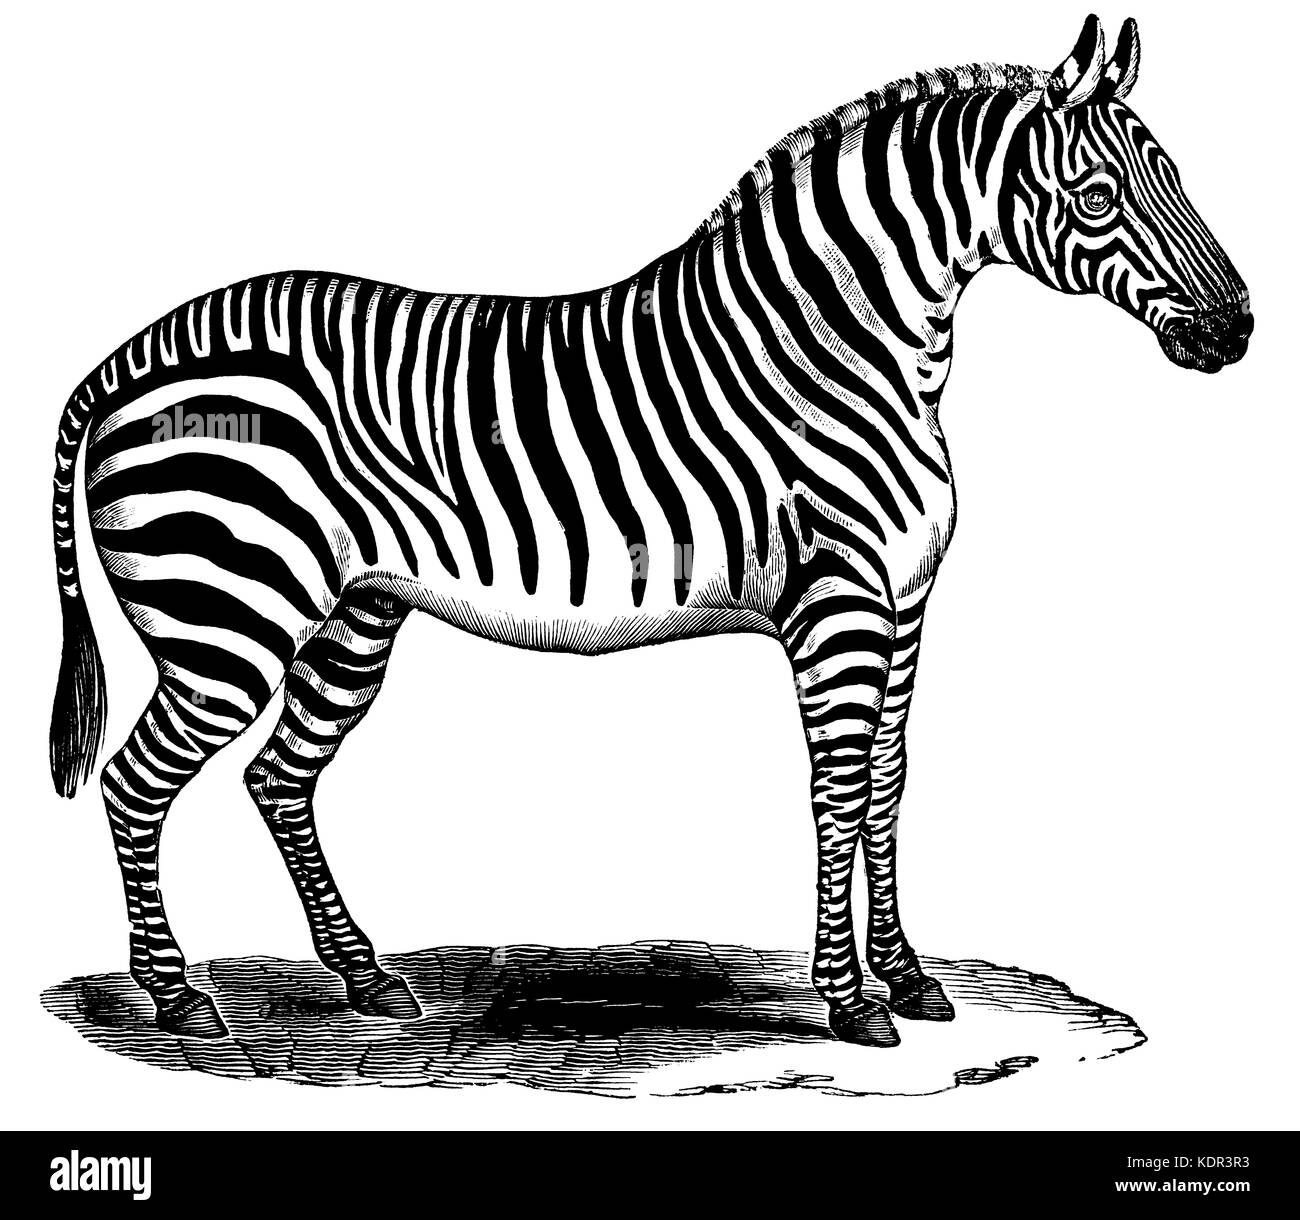 Zebra standing at rest, from vintage wood-engraving Stock Photo